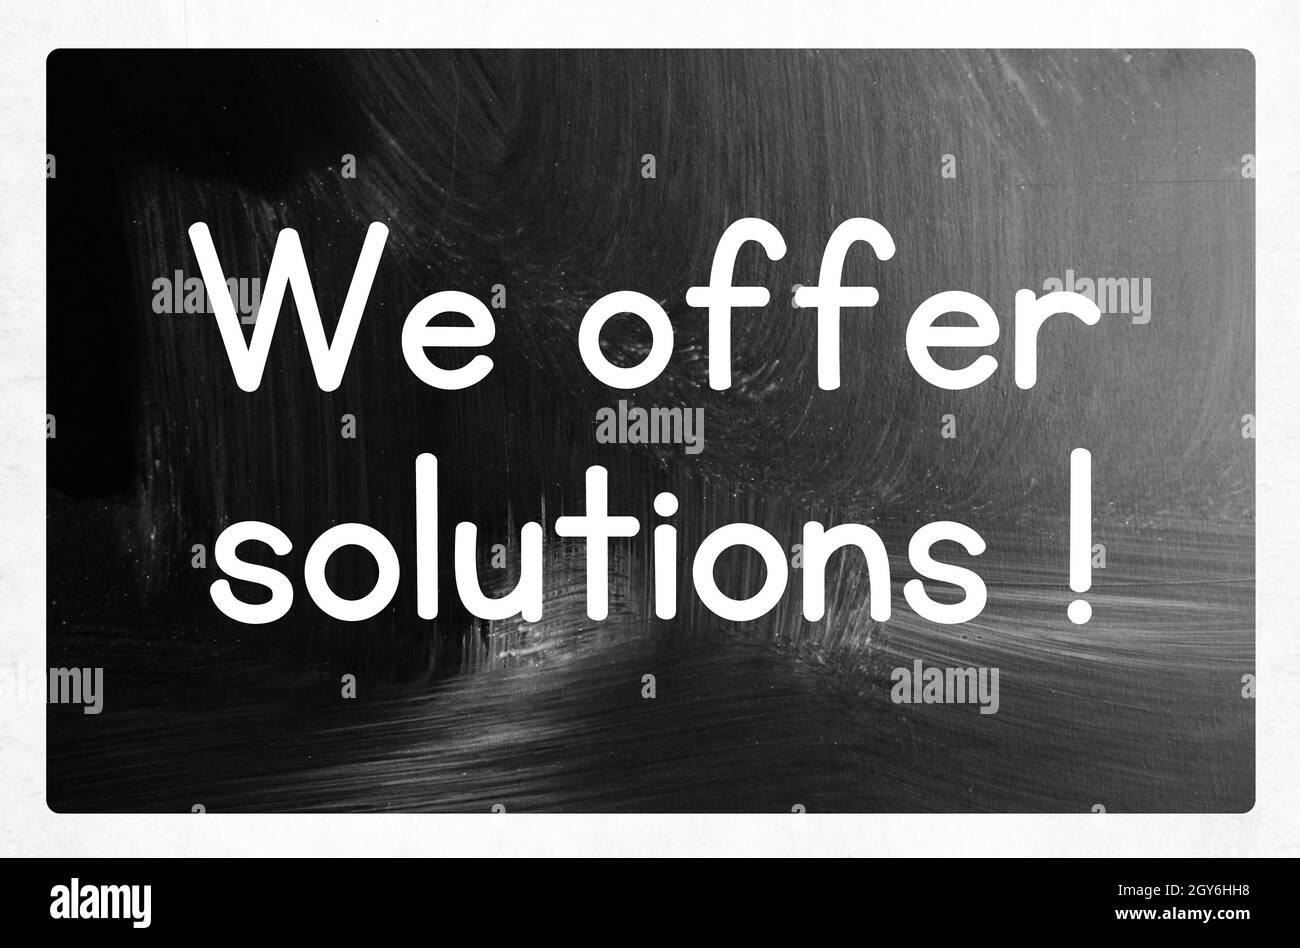 we offer solutions! Stock Photo